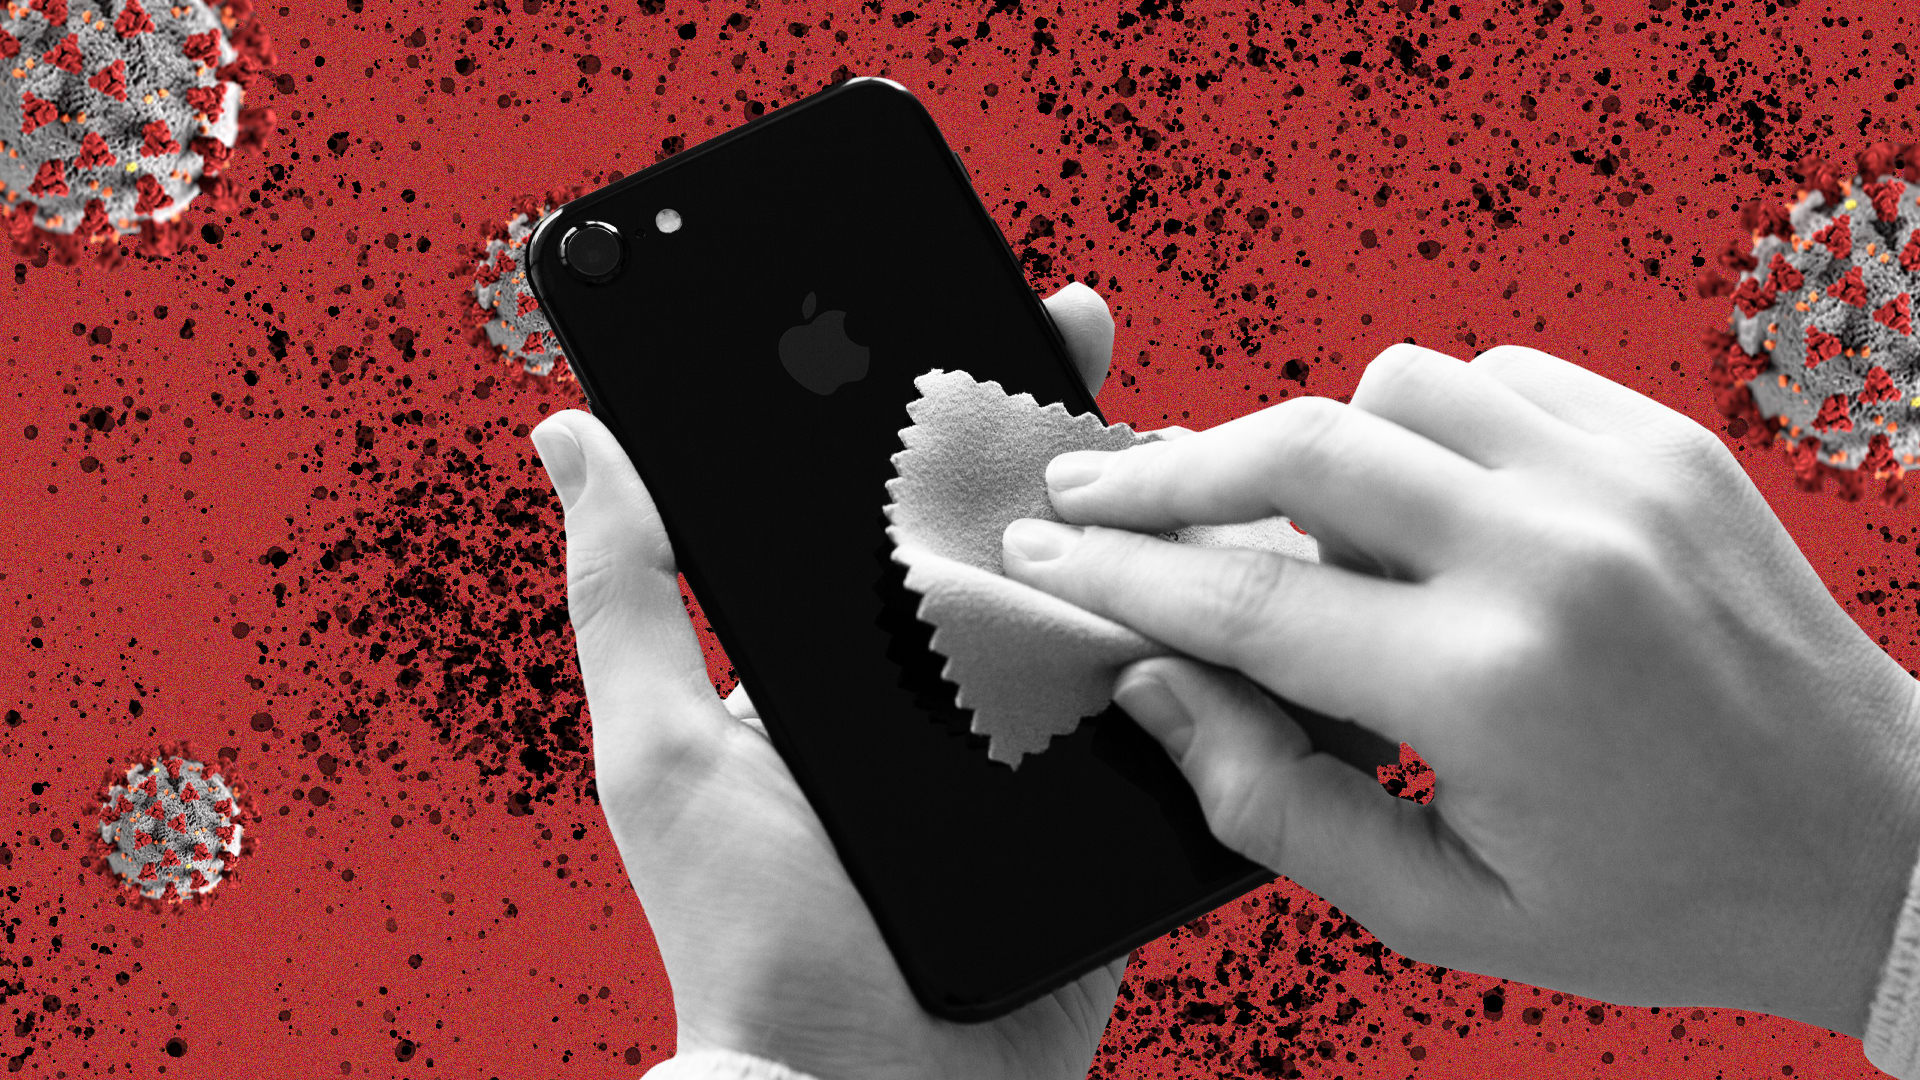 Should you clean your phone during the coronavirus? Yes, and here’s how to do it the right way